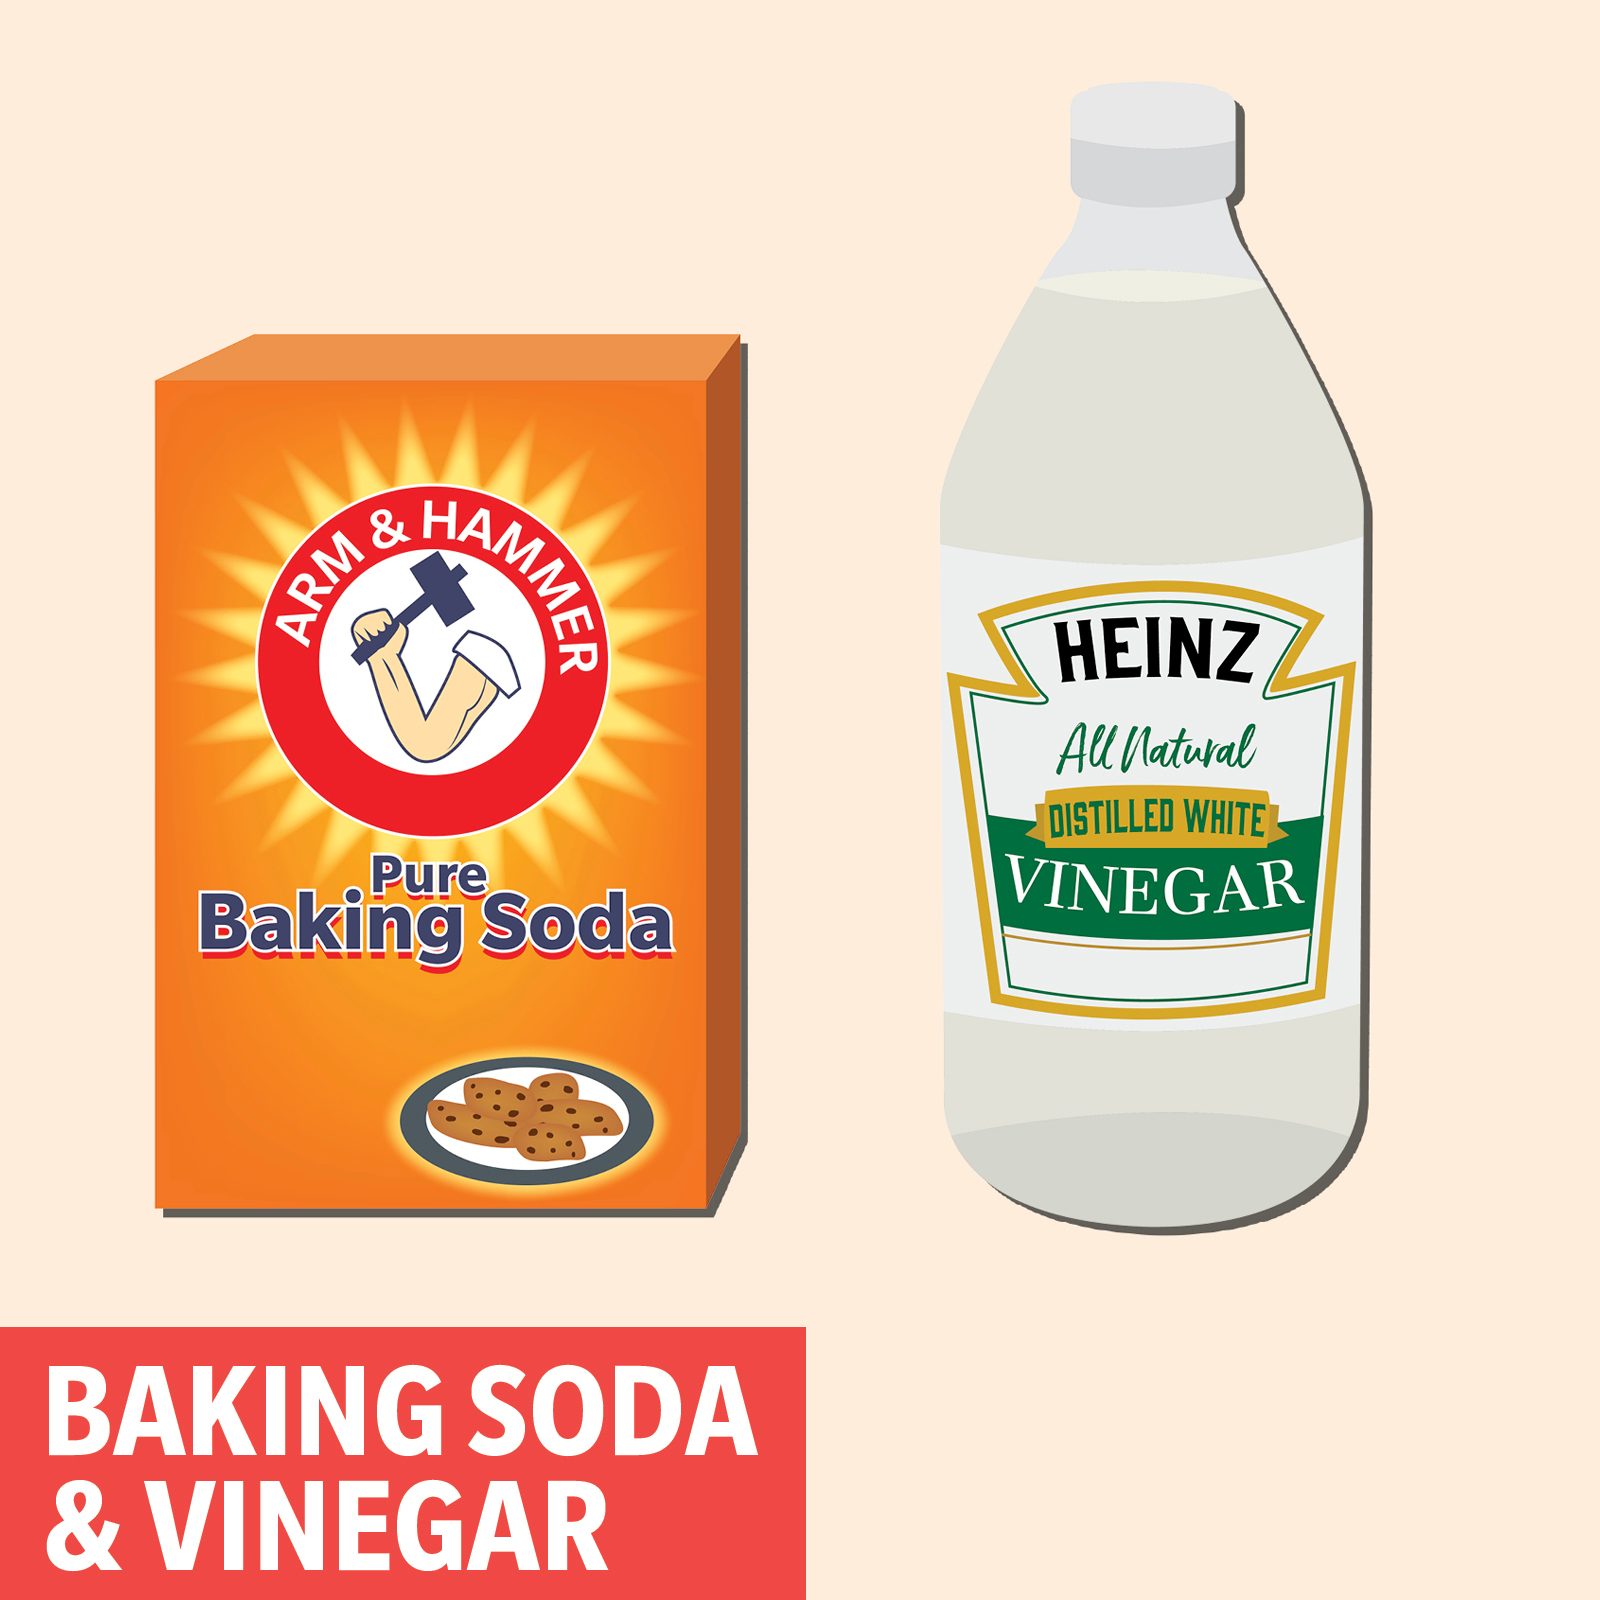 Why You Should Never Use Baking Soda and Vinegar to Clean Clogged